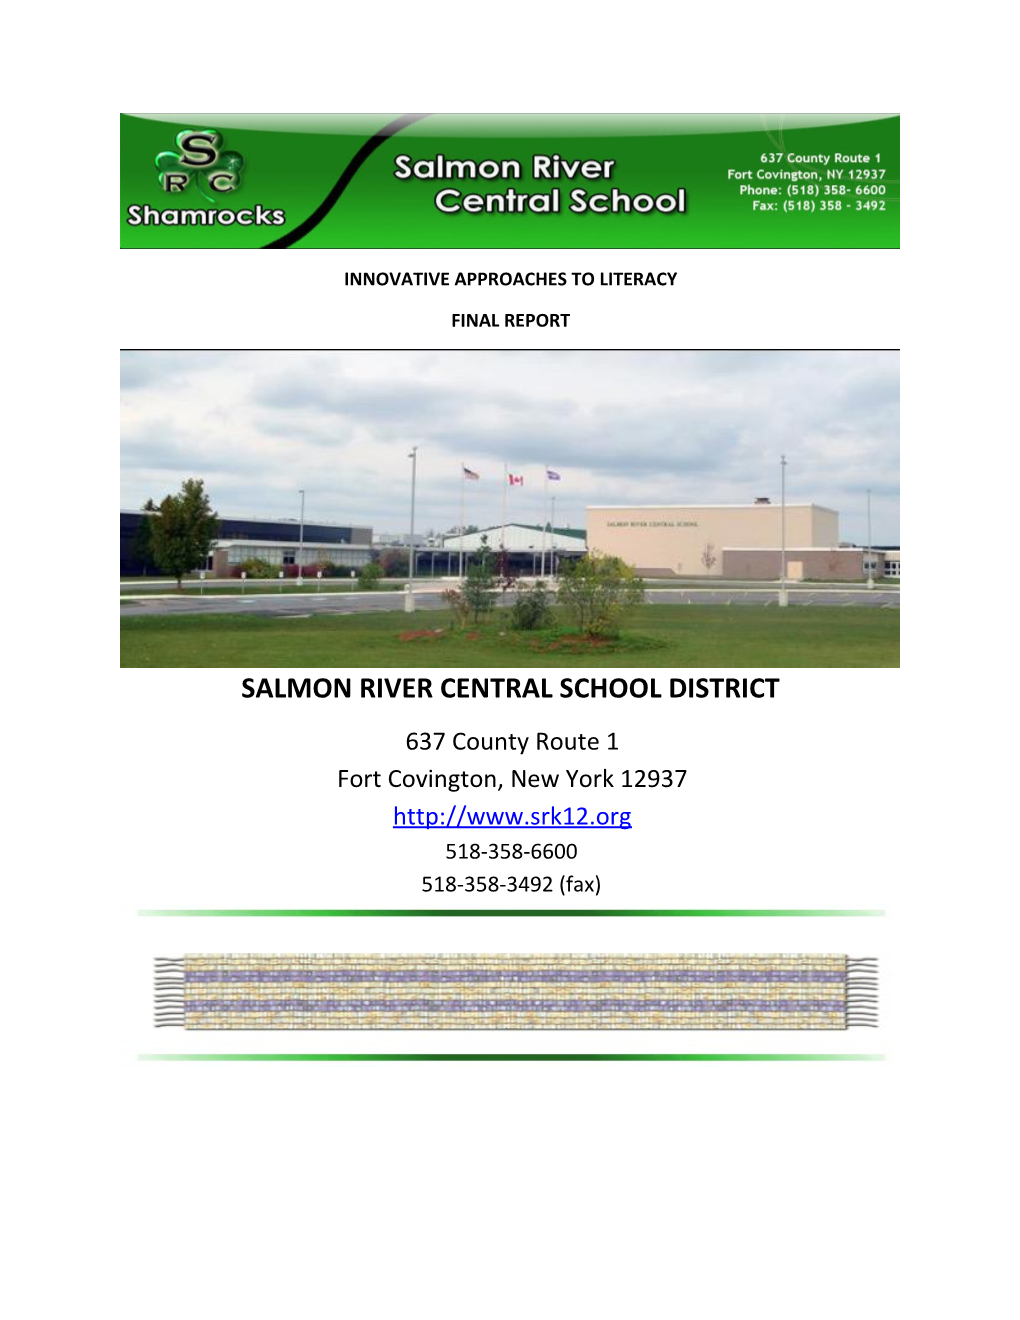 Salmon River Central School District Final Report (Word)